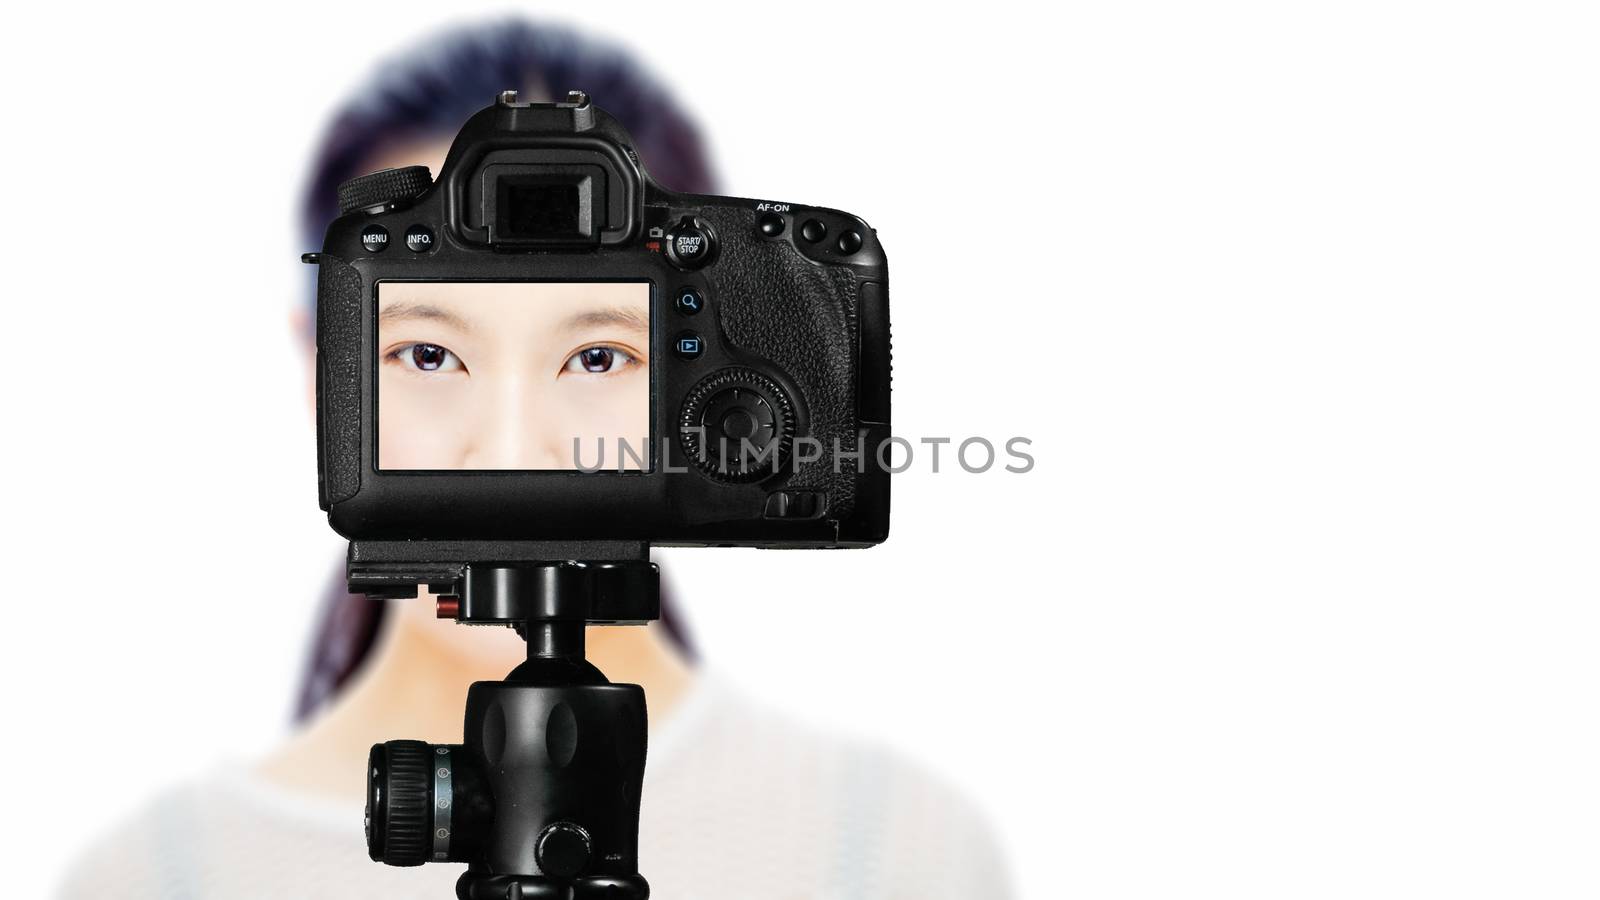 Focus on live view on camera on tripod, teenage girl  beauty shoot image on back screen with blurred scene in background. Teenage vlogger livestreaming show concept